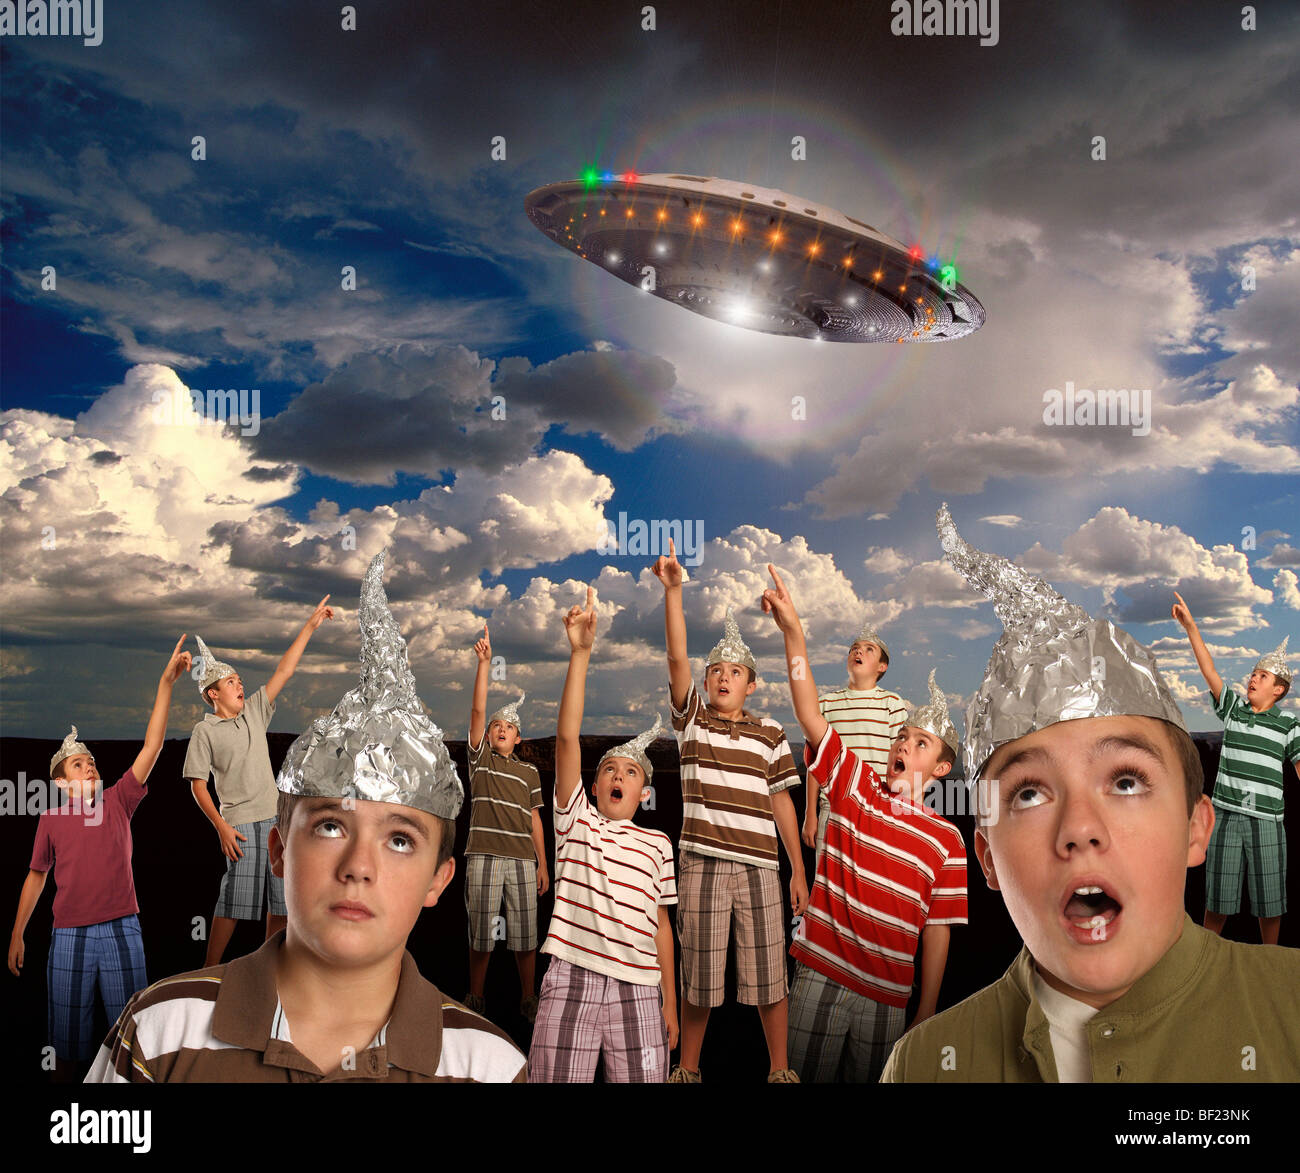 A group of CLONES wearing tin-foil hats points to a UFO in the sky! Stock Photo